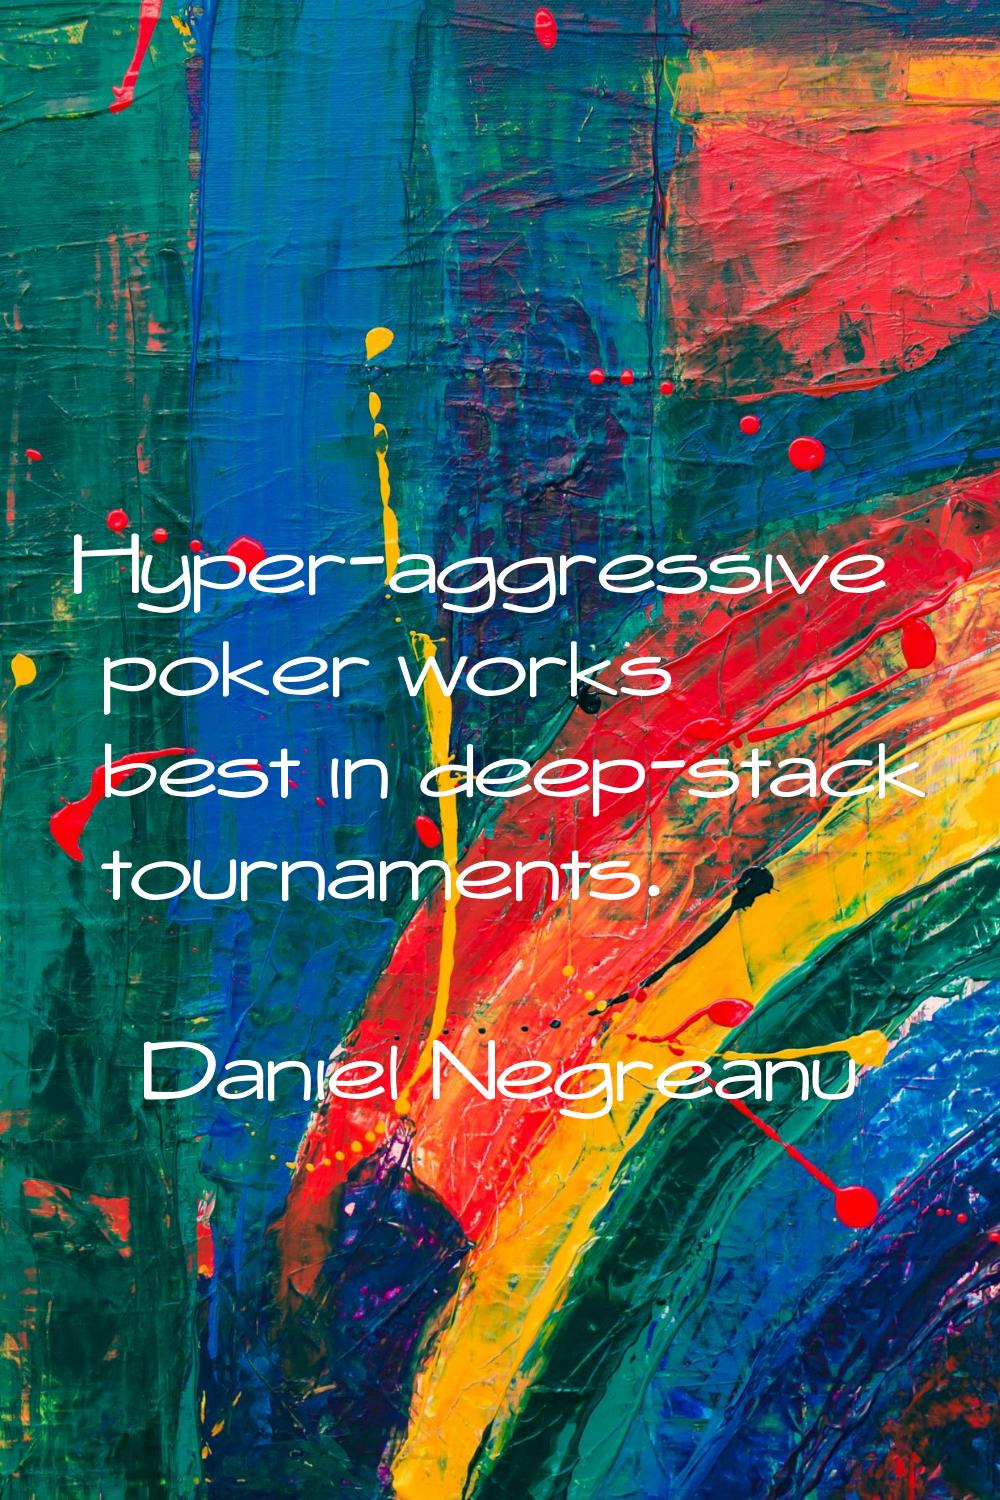 Hyper-aggressive poker works best in deep-stack tournaments.